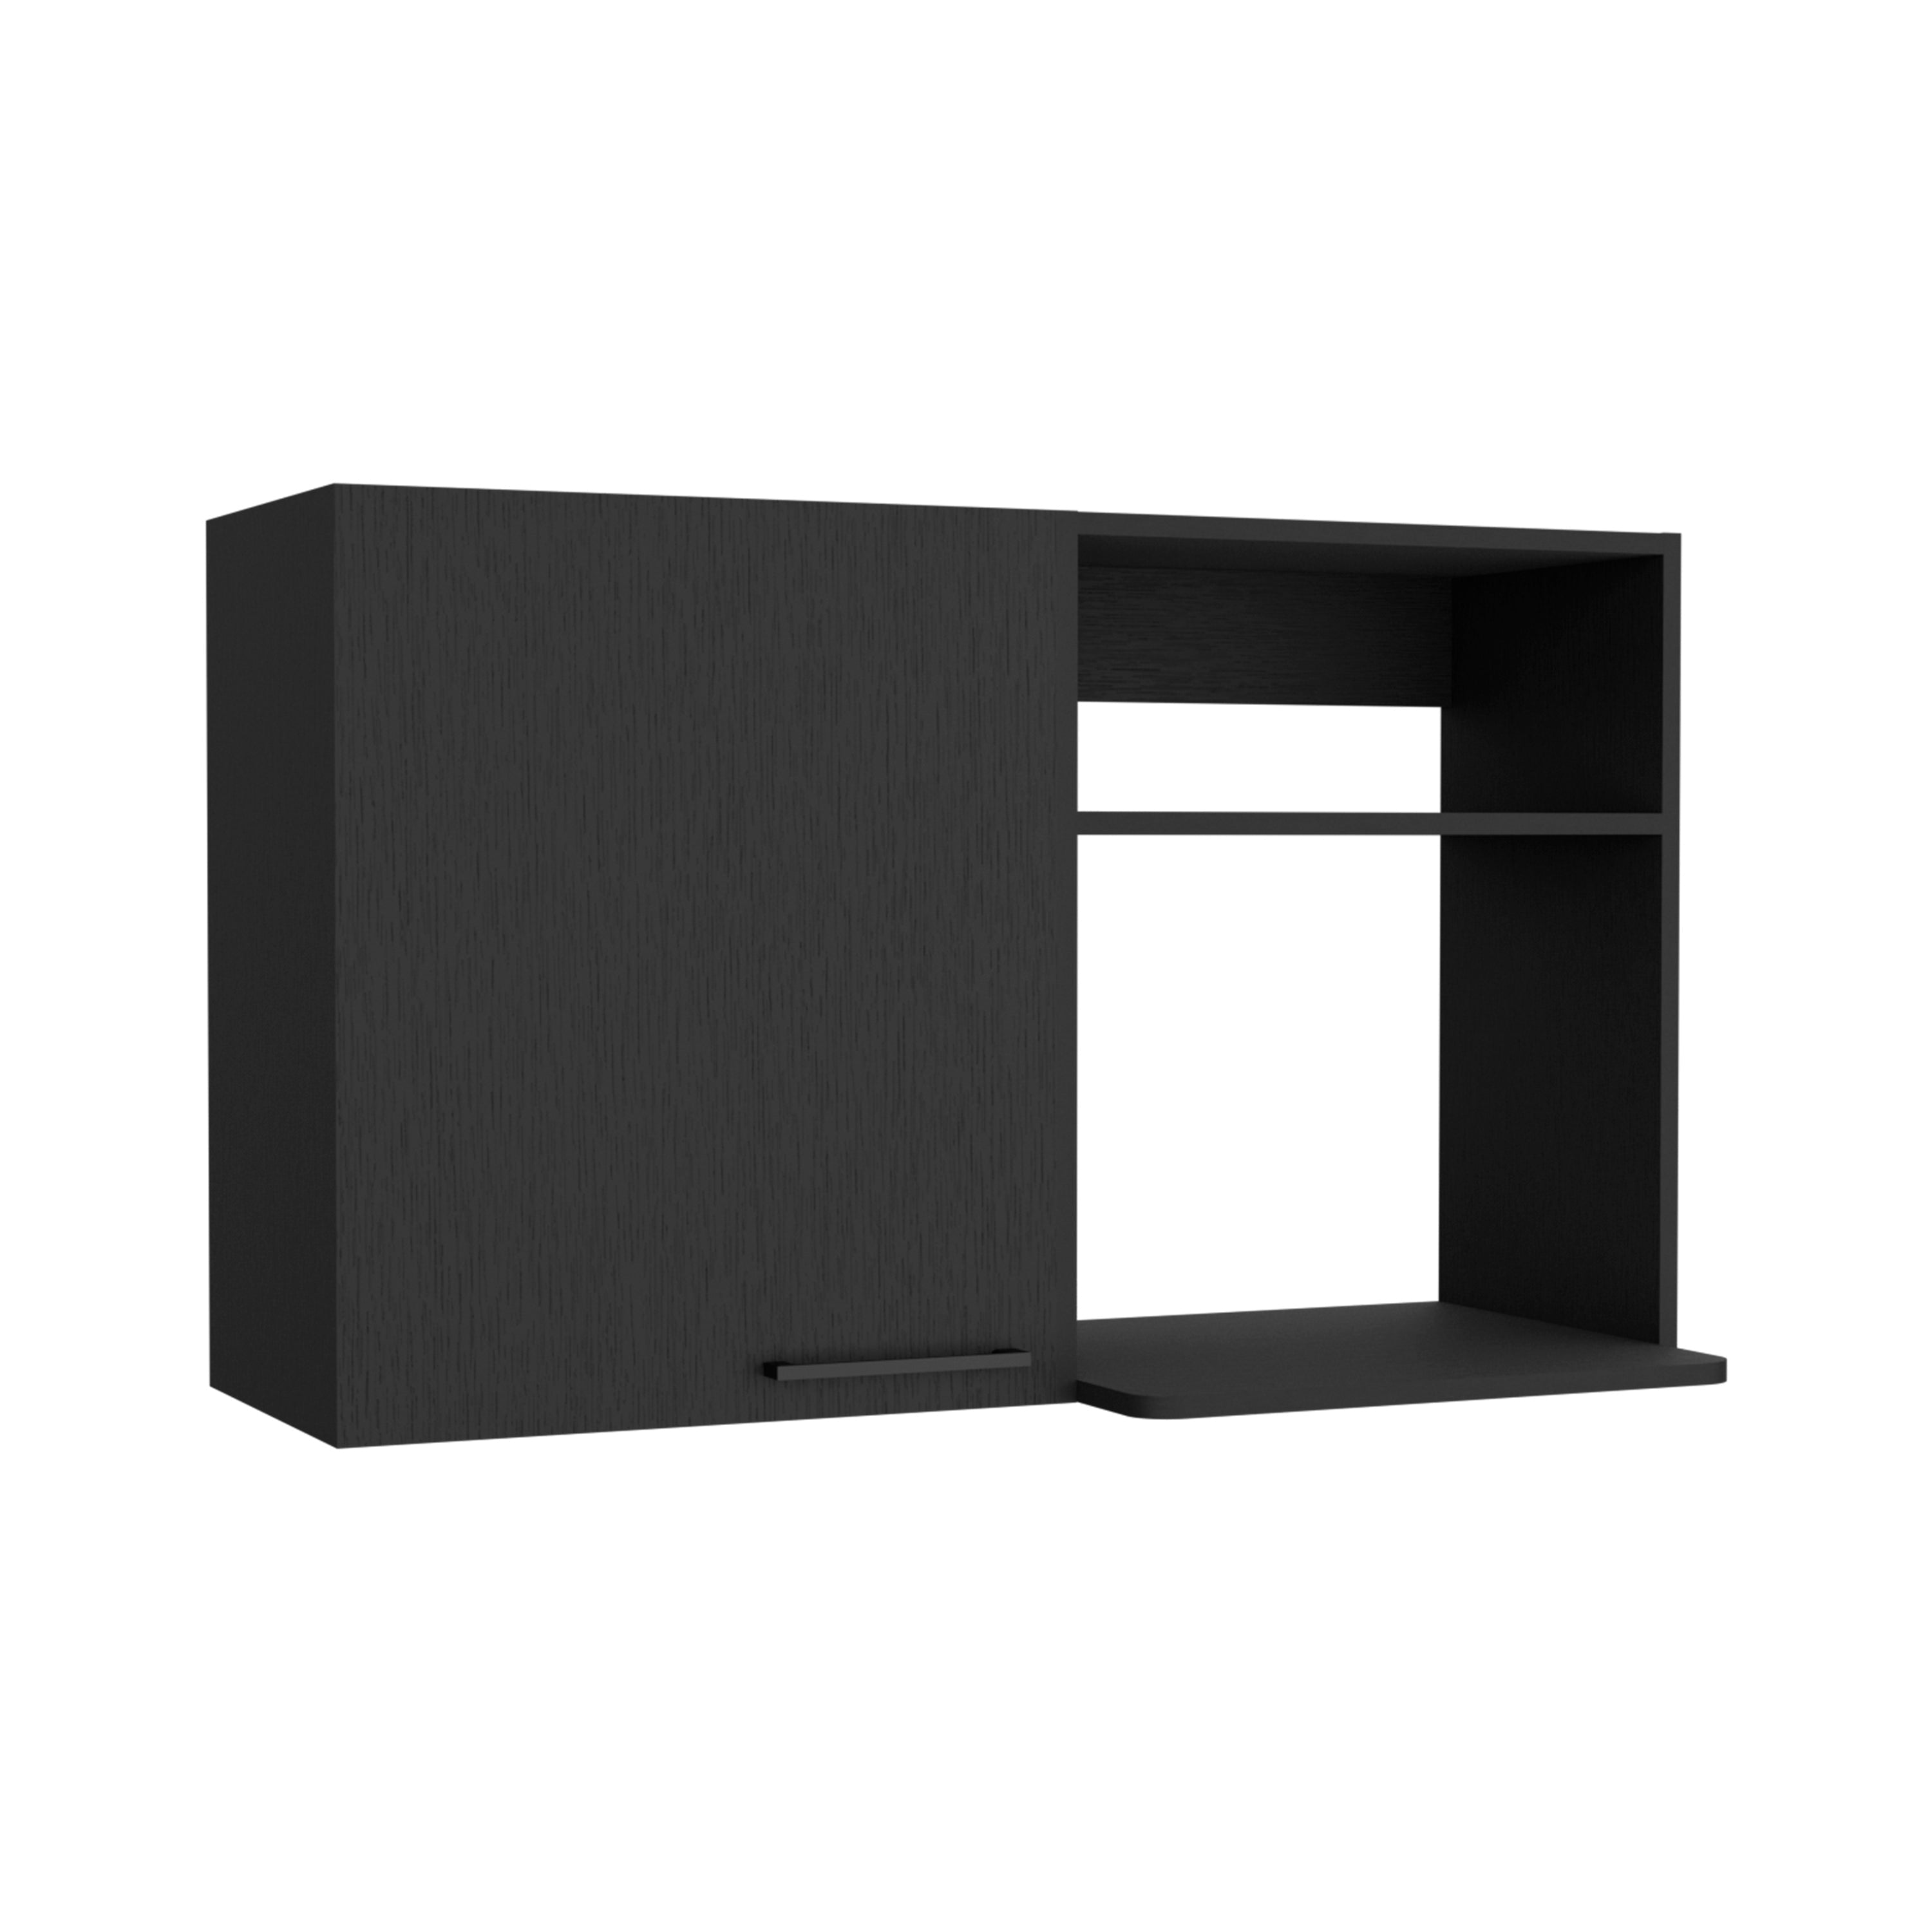 ZNTS Napoles 2 Wall Cabinet B070102692